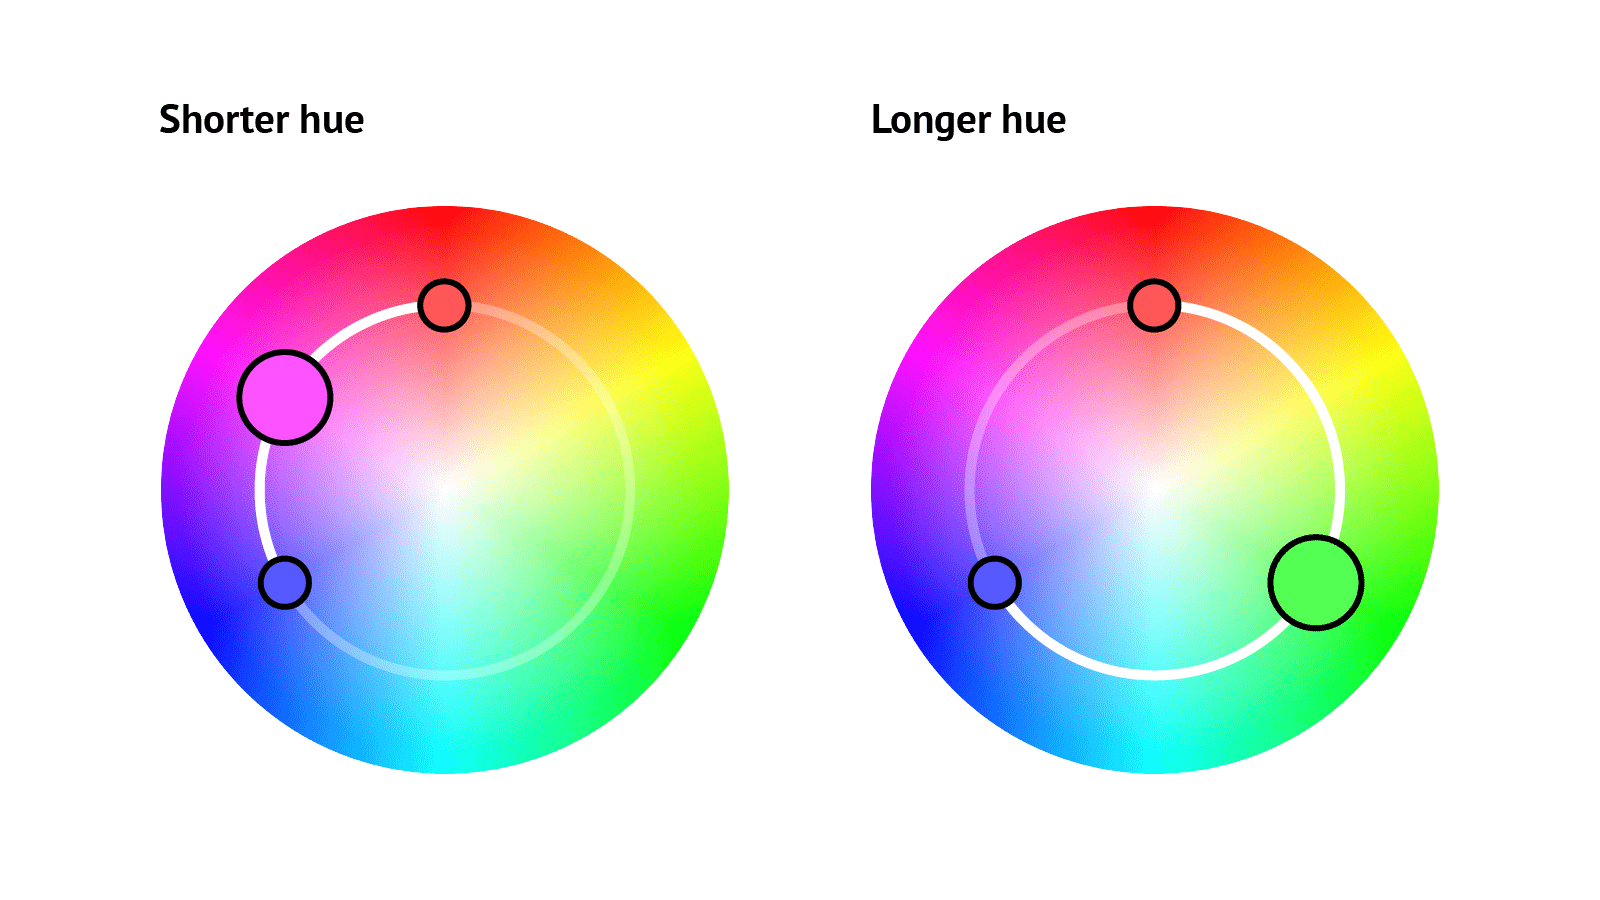 Comparing longer and shorter interpolation direction in the HSL color space. The shorter hue produces a pink-ish purple (left) and the longer hue produces a bright green (right).